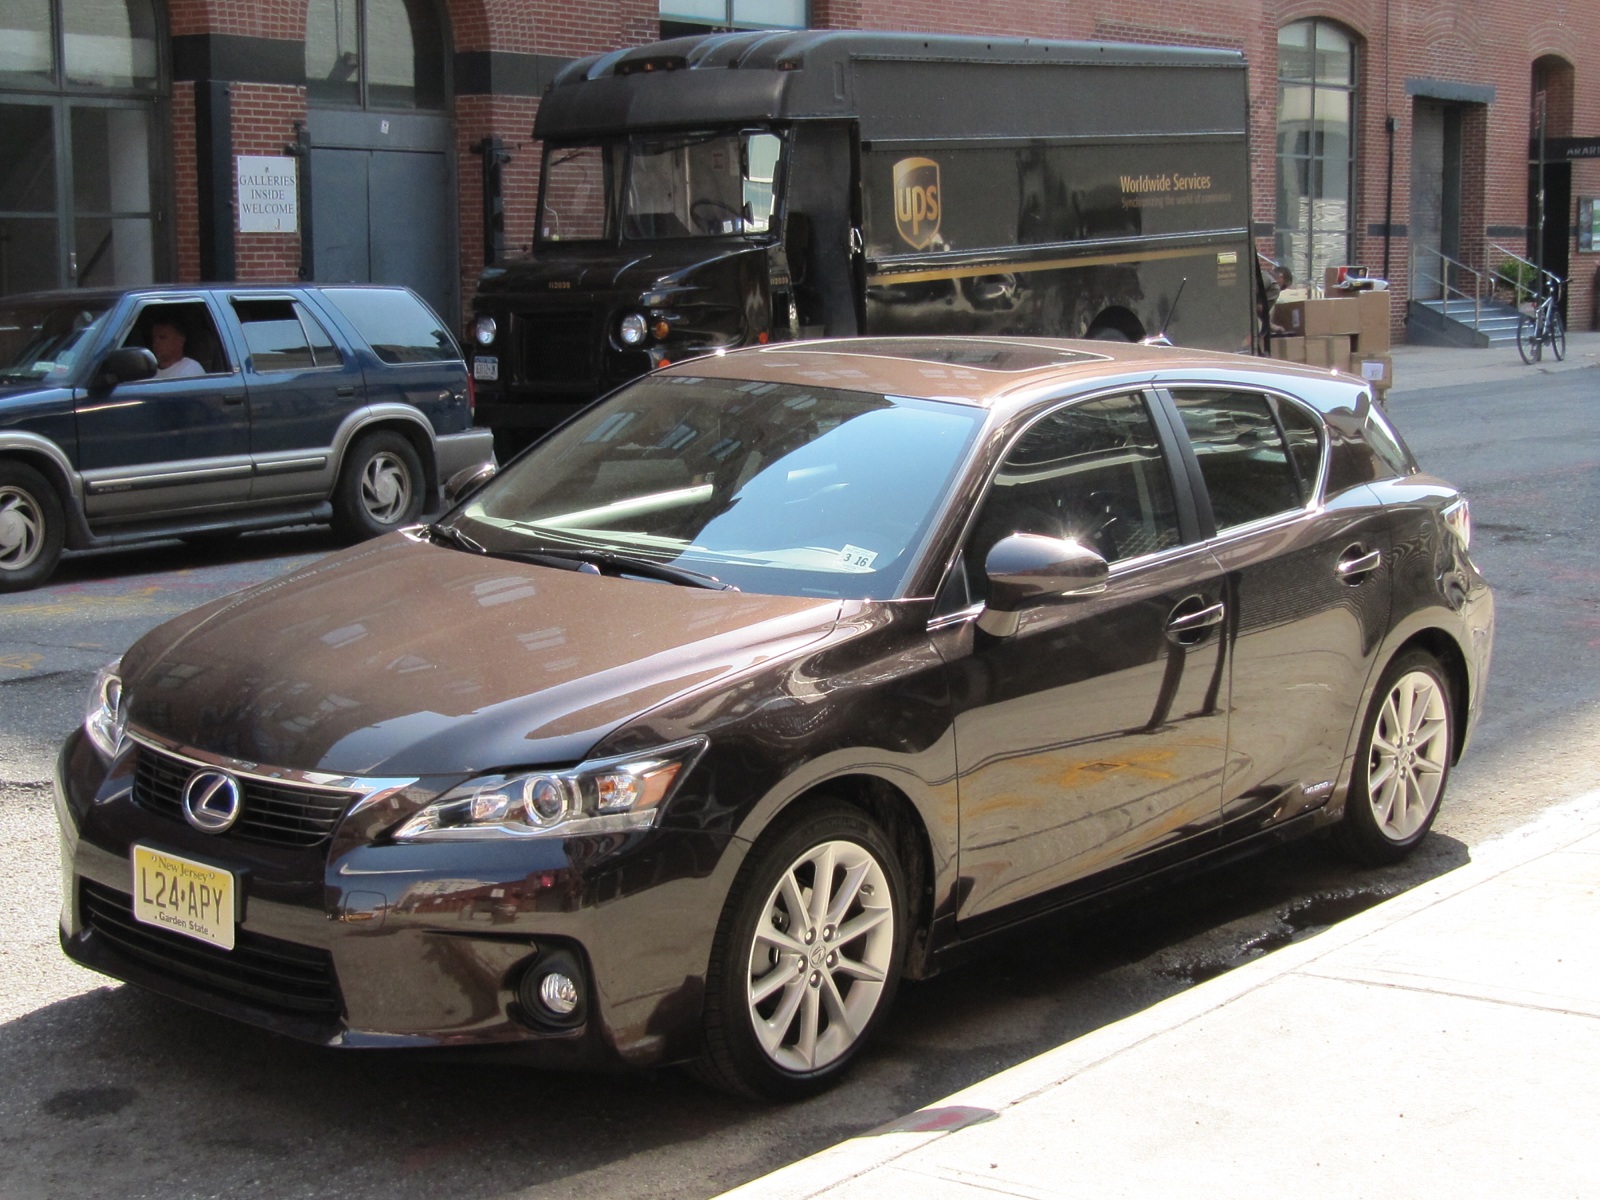 2011 Lexus CT 200h Compact Hybrid Hatch: First Drive Review